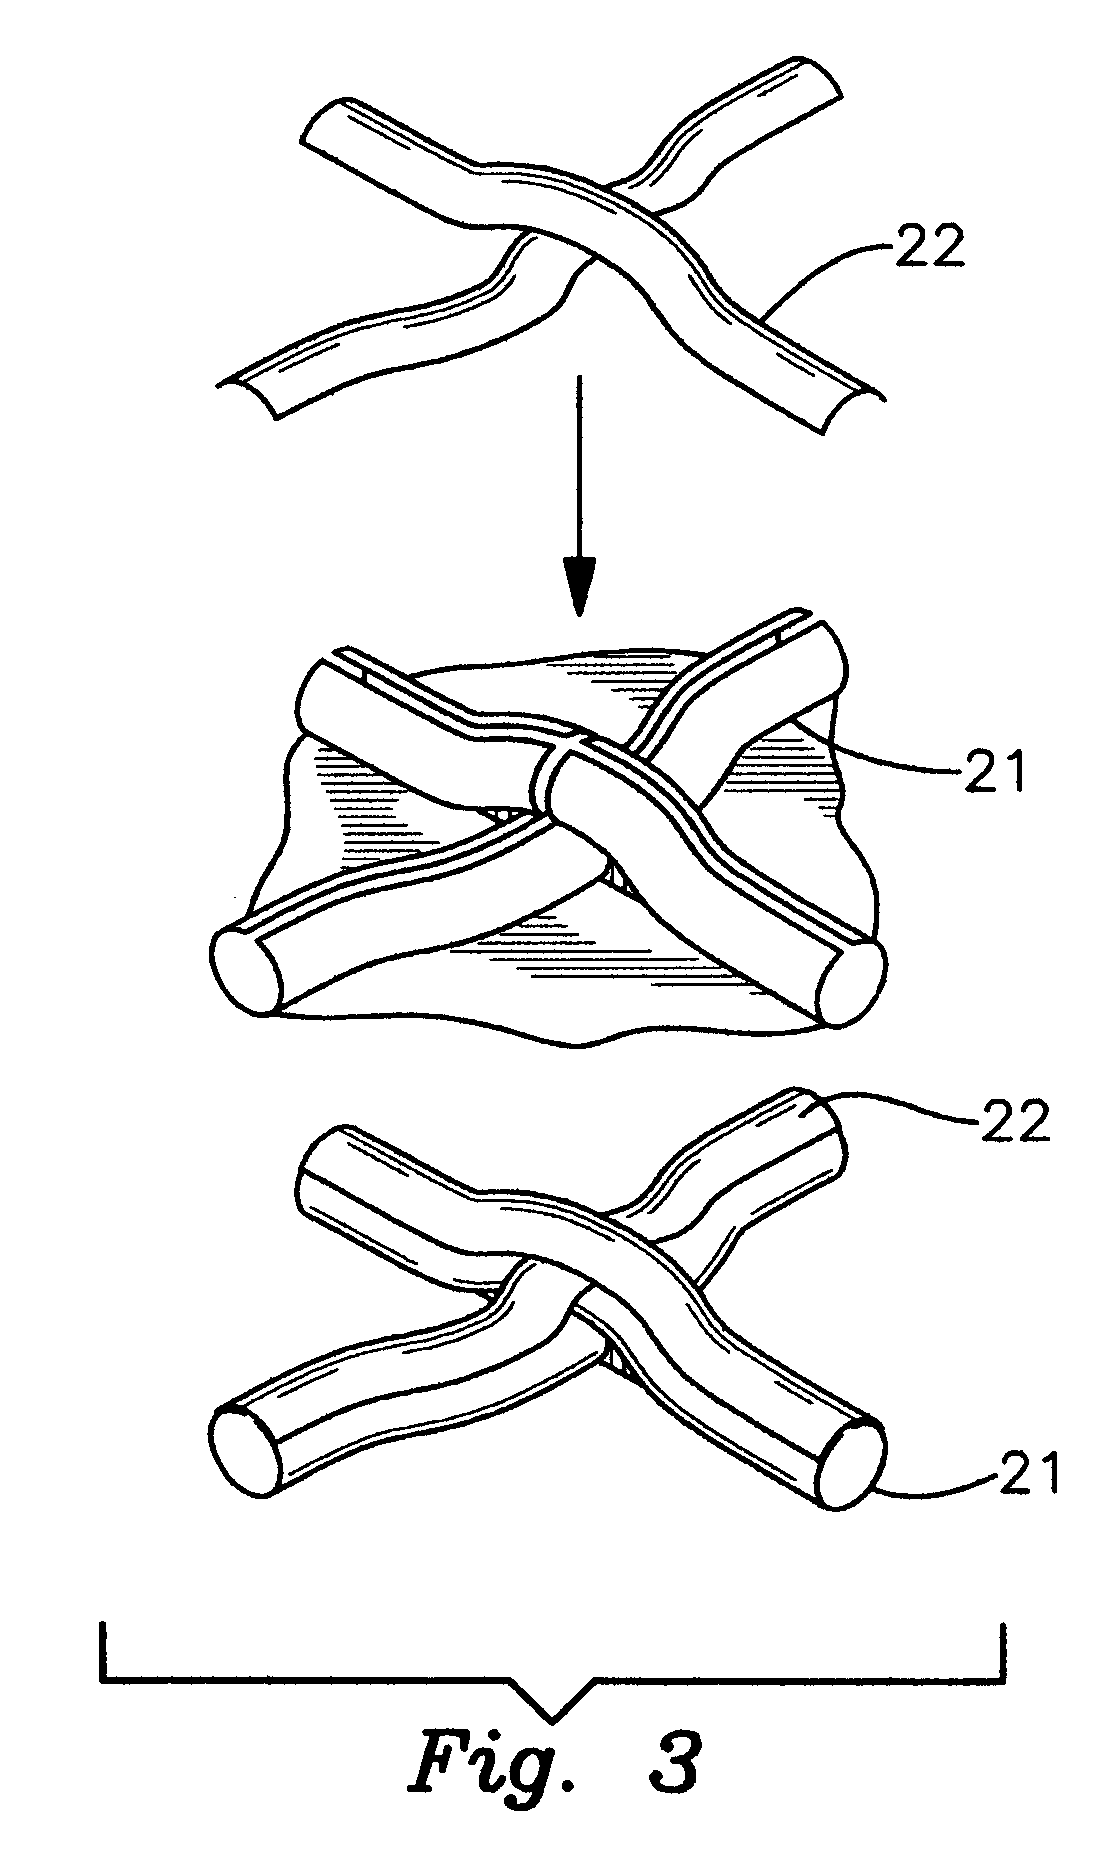 Stringing sandwich, an apparatus that lays strings on top of each other within a frame of a racquet